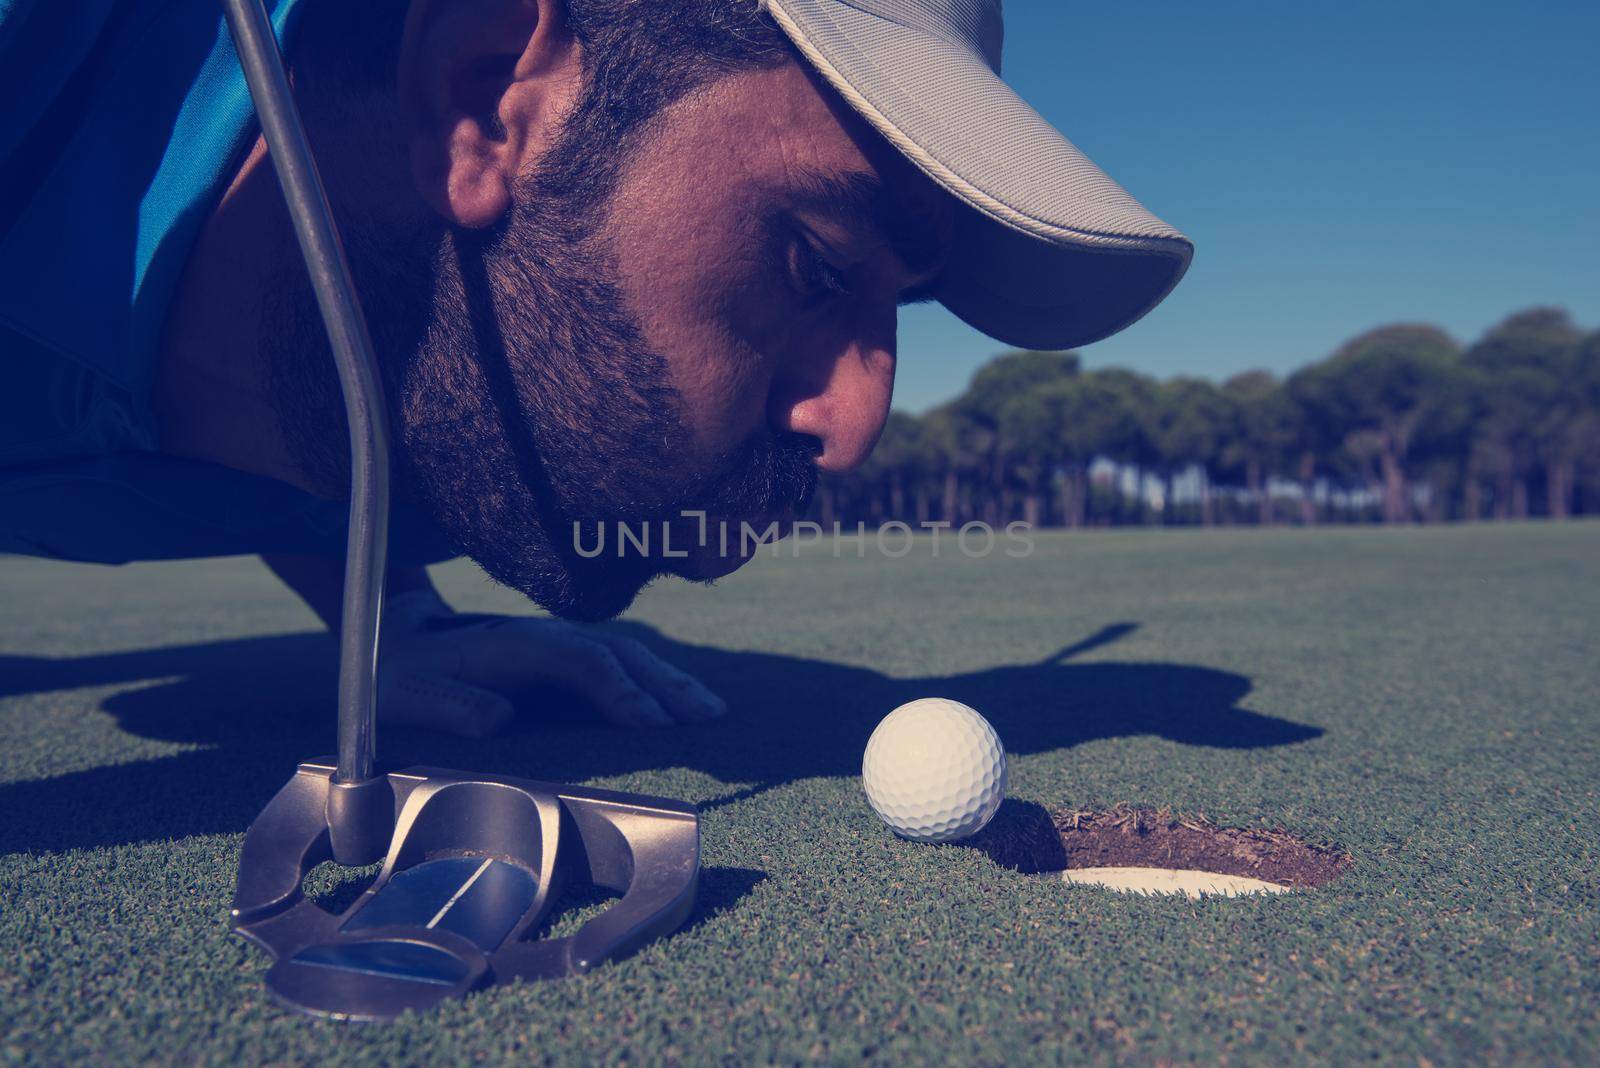 golf player blowing ball in hole. concept of cheating and success